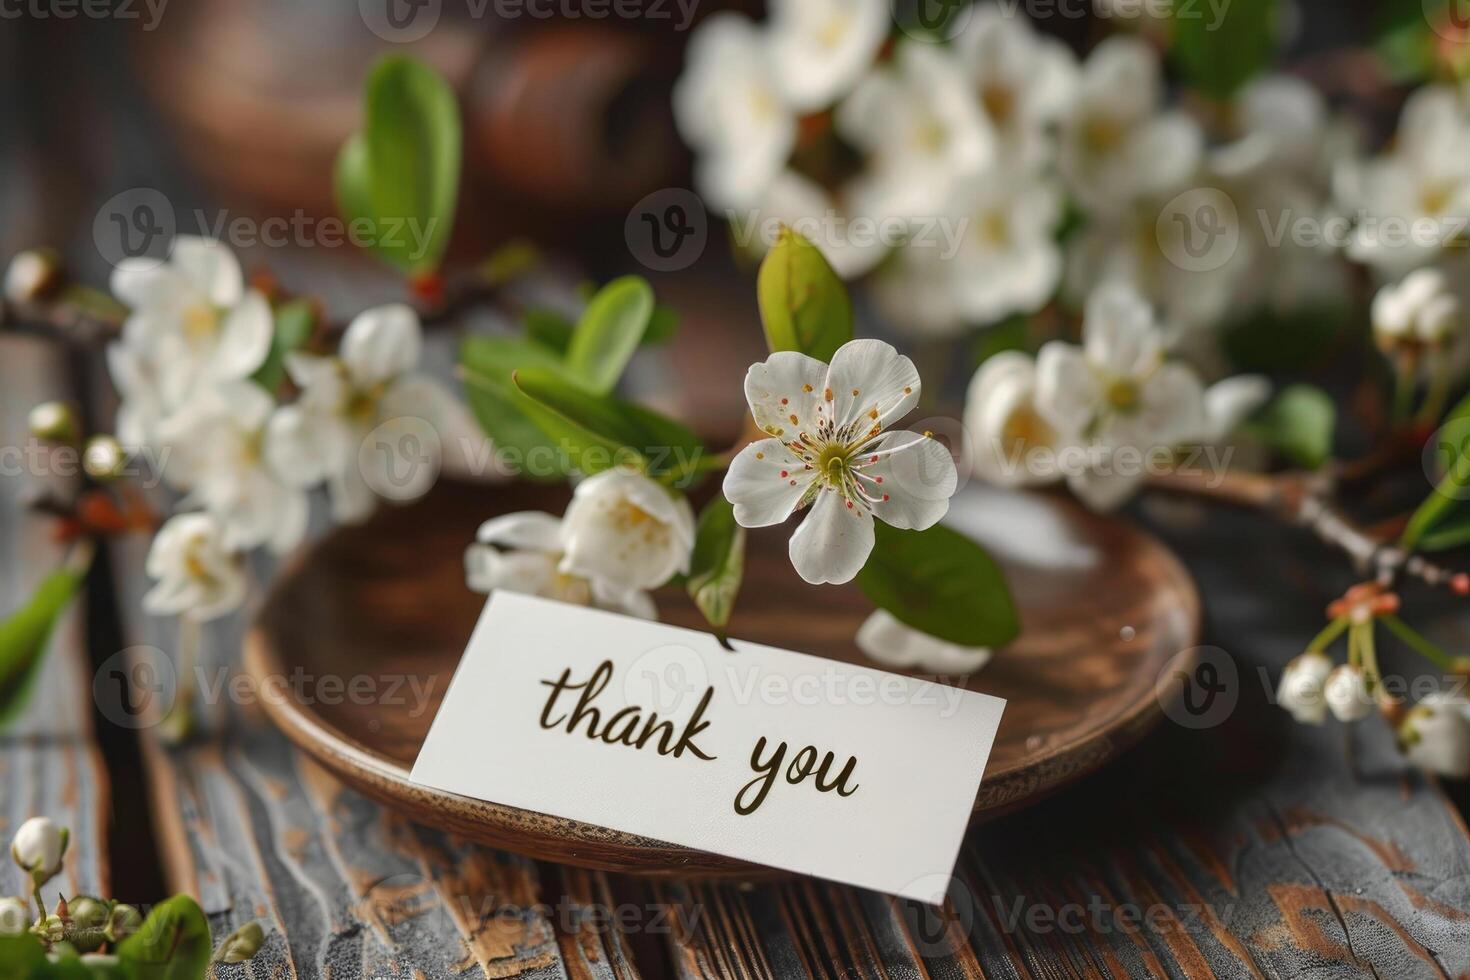 Thank you sign amidst spring blossoms in high detail photo